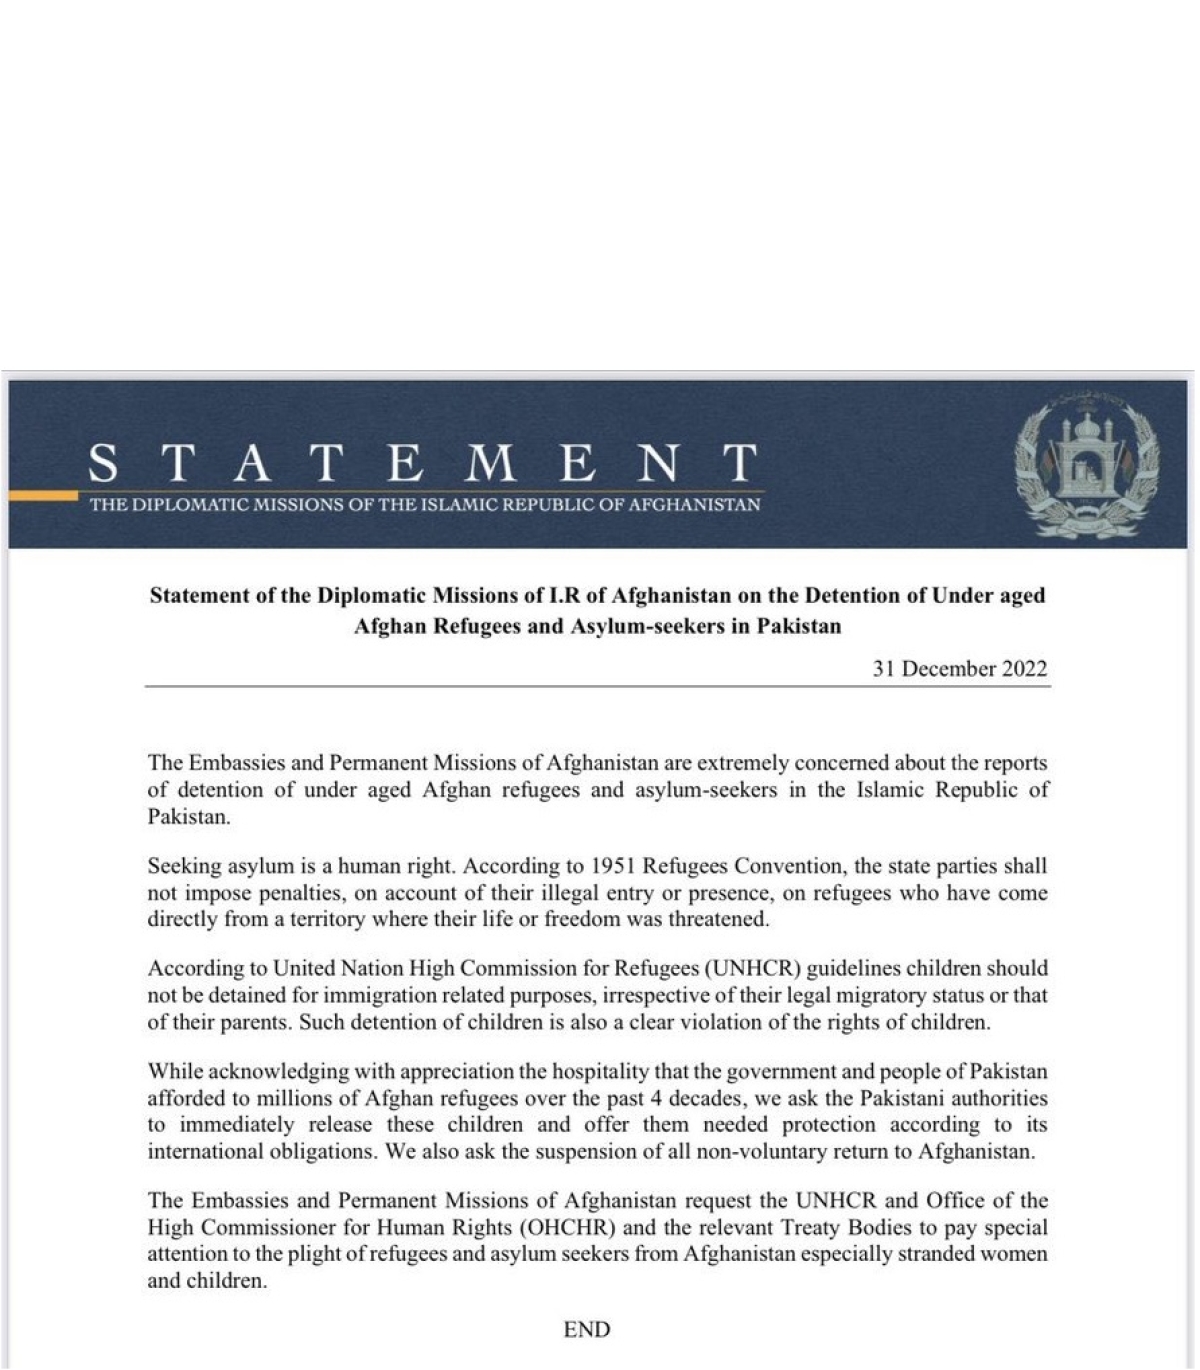 STATEMENT OF THE DIPLOMATIC MISSIONS OF THE ISLAMIC REPUBLIC OF AFGHANISTAN  ON THE DETENTION OF UNDER AGED AFGHAN REFUGEES AND ASYLUM-SEEKERS IN PAKISTAN